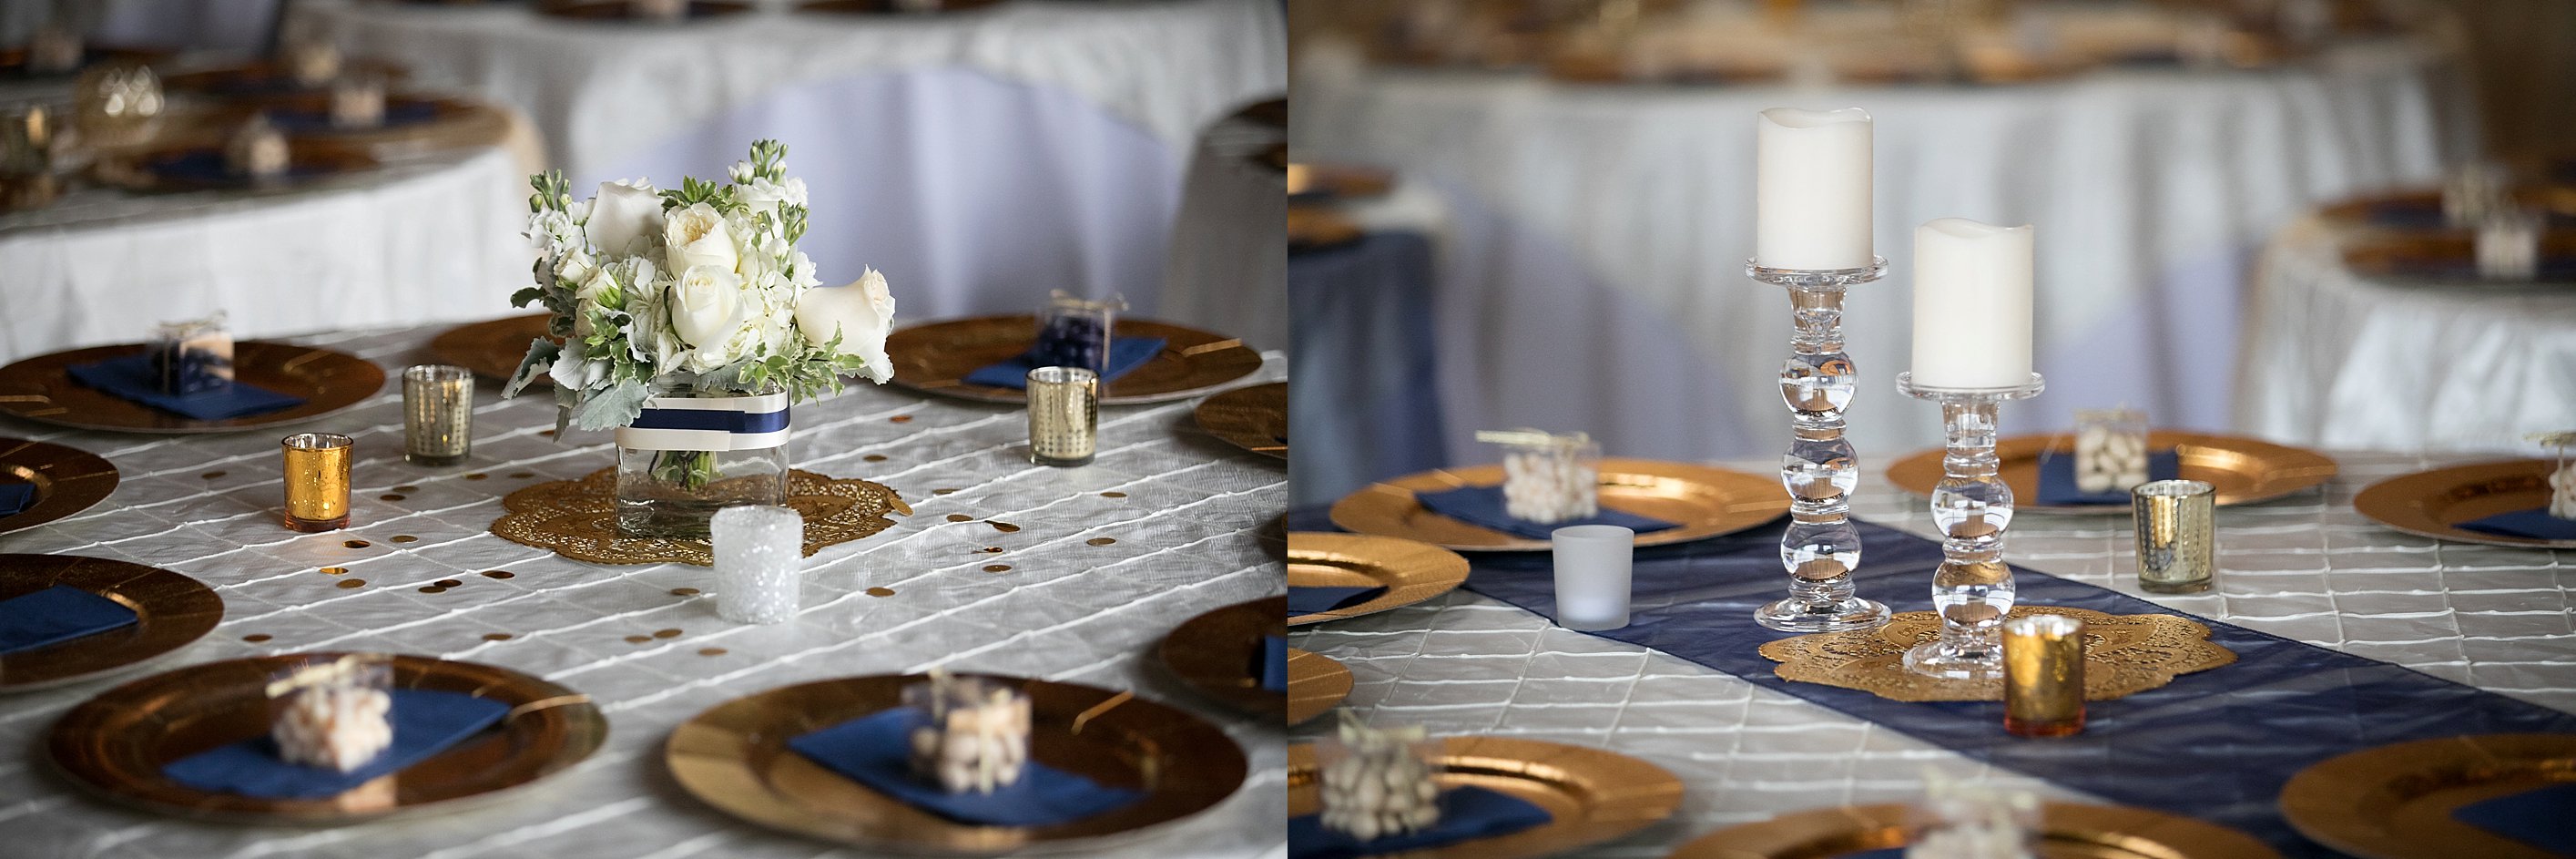 28 Event Space Table Decorations